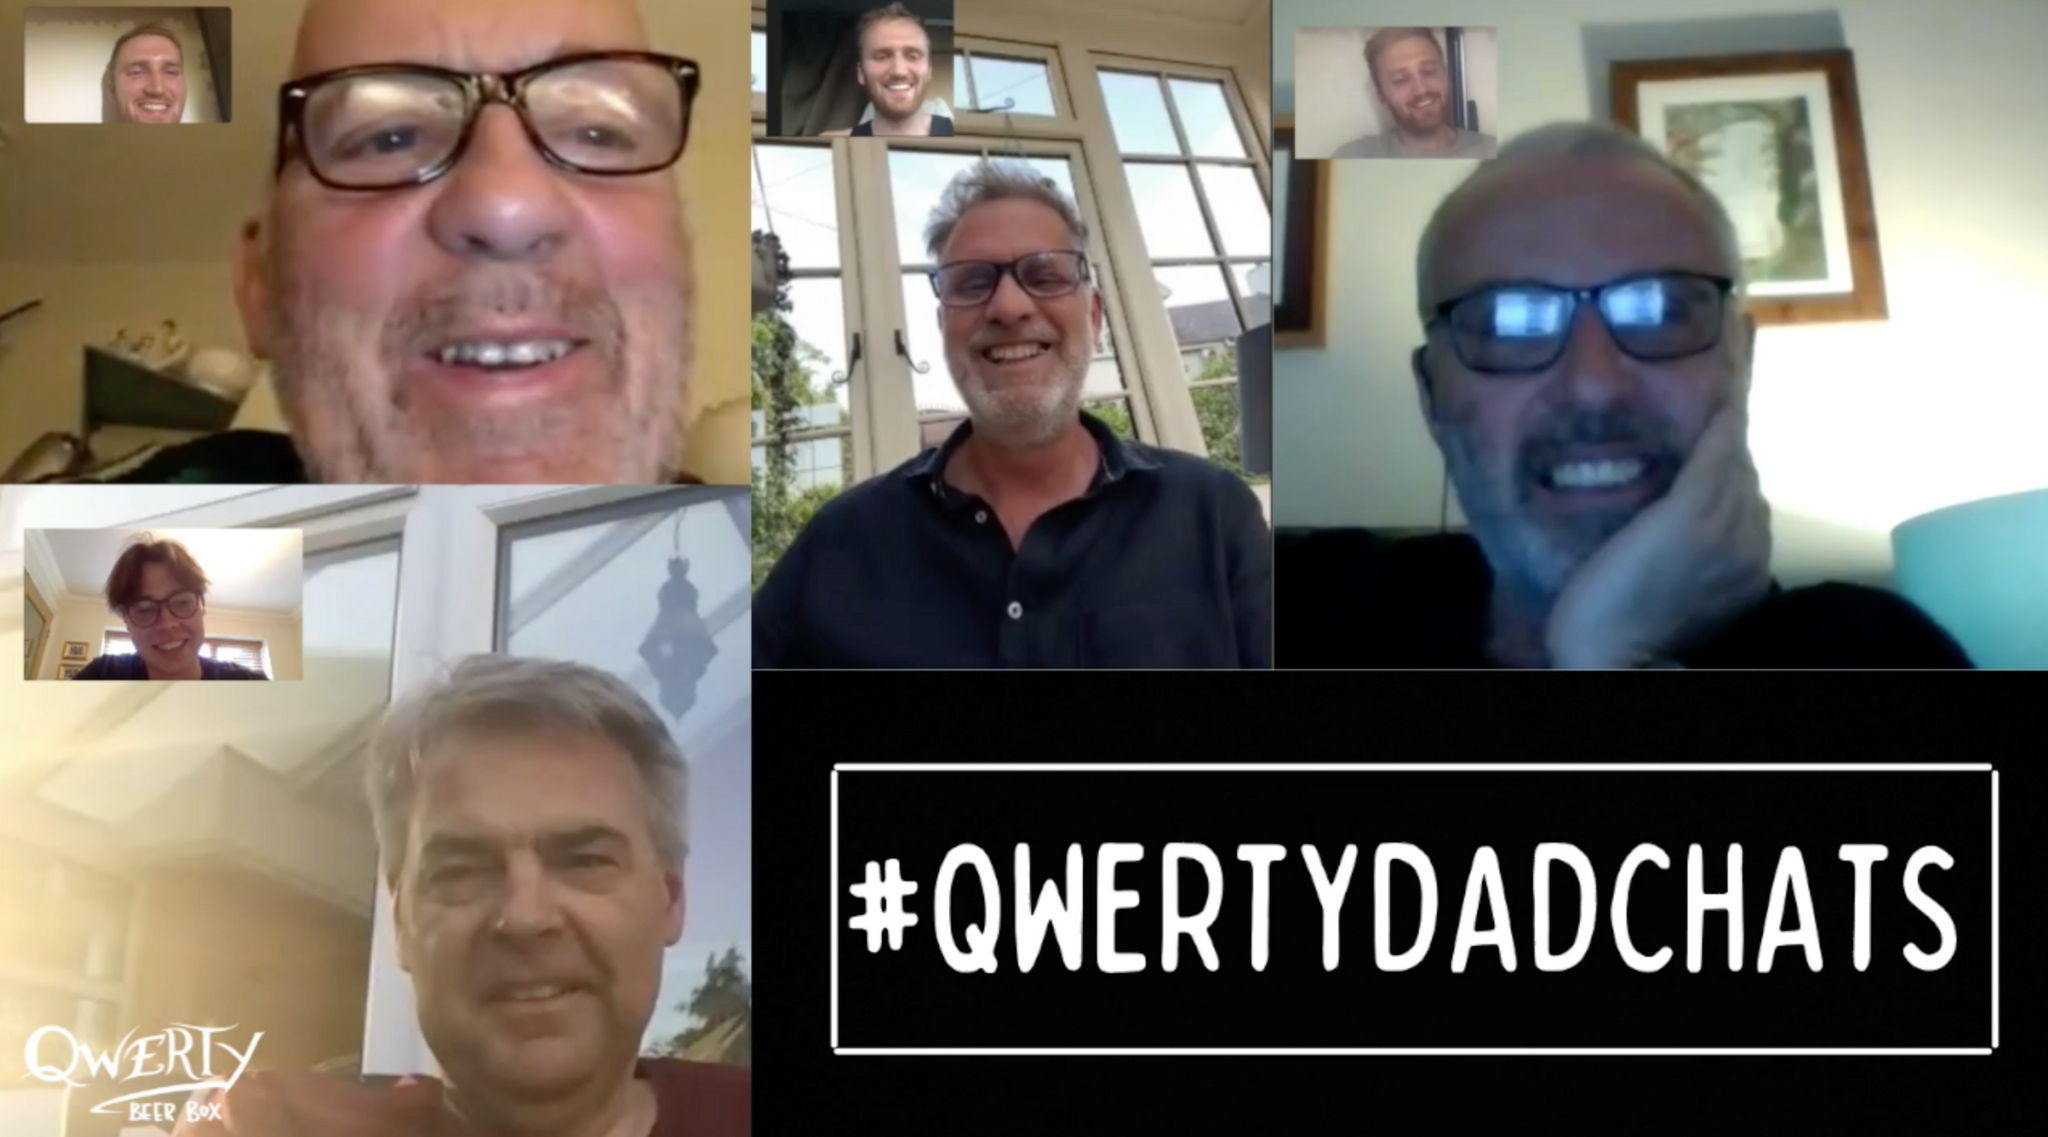 #QWERTYDadChats - Speaking To The Men Themselves